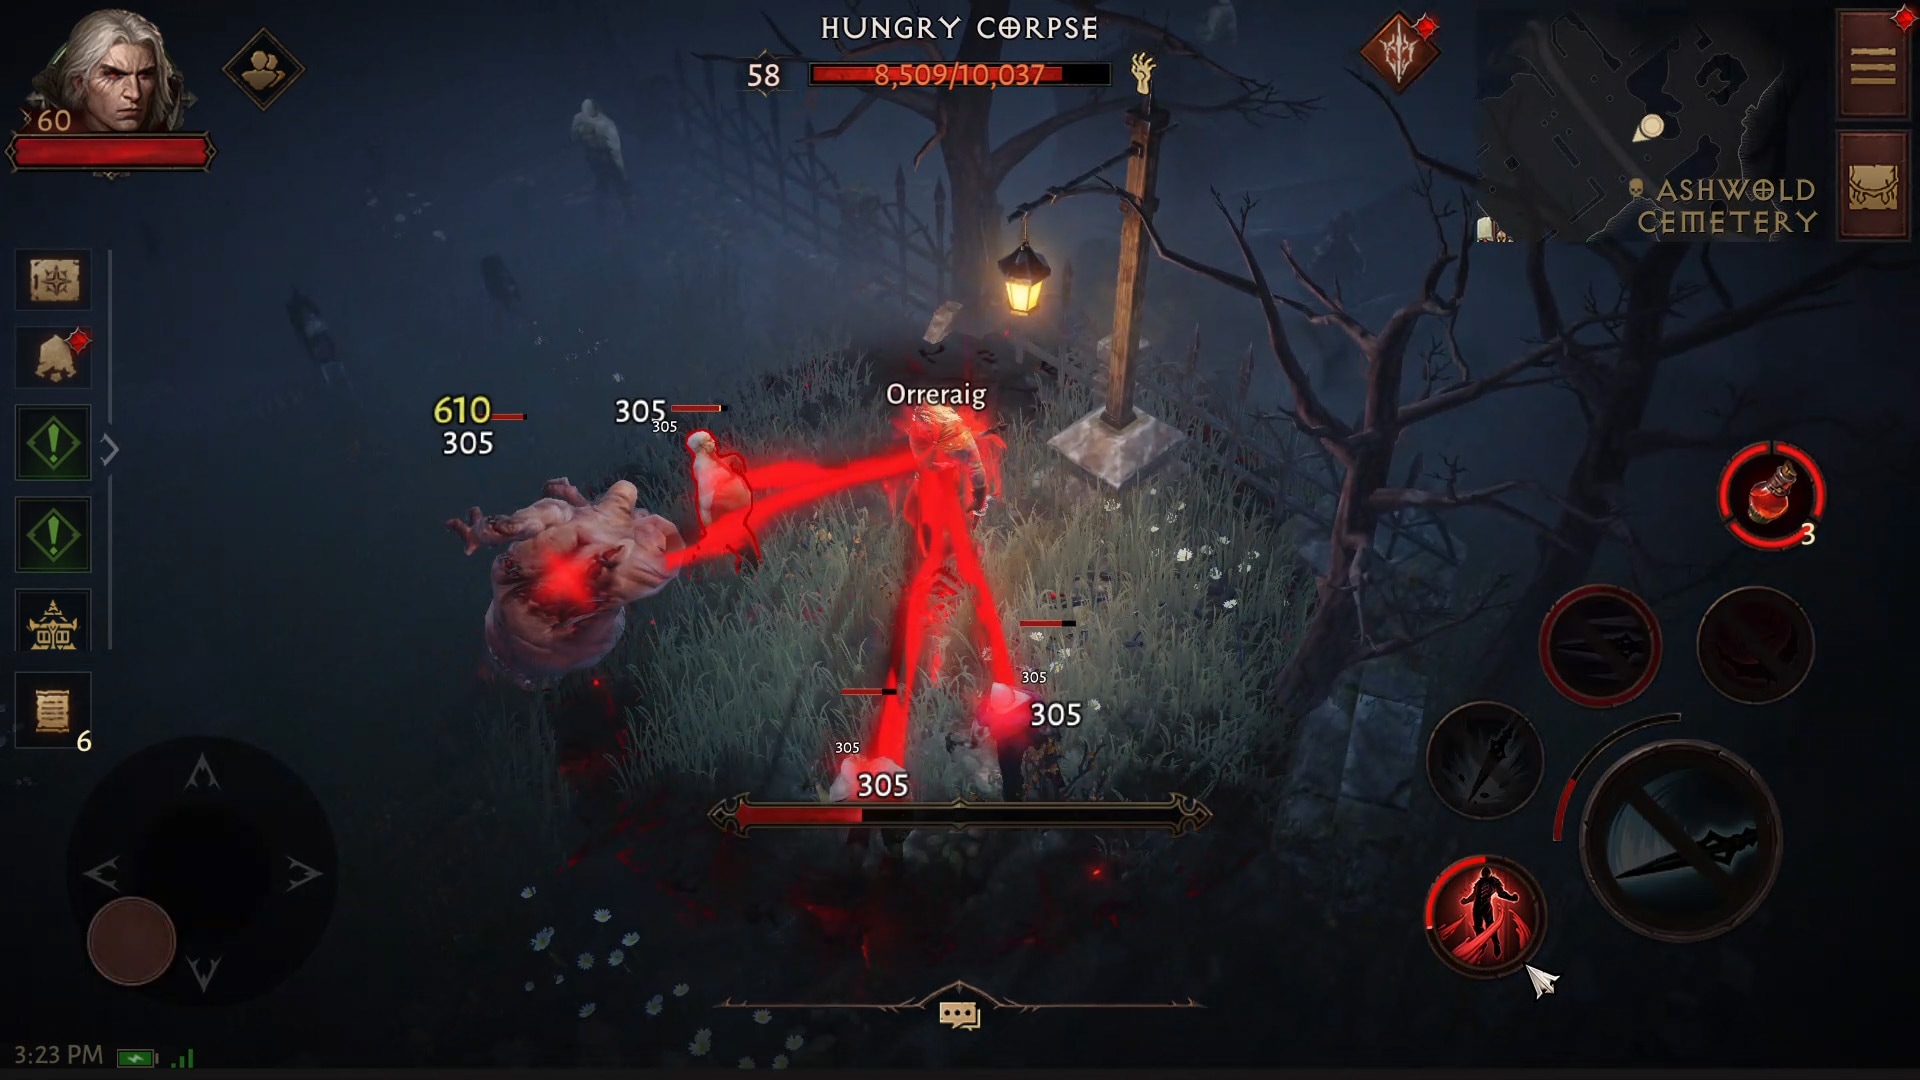 Introducing the Newest Diablo Immortal Class: Blood Knight : r